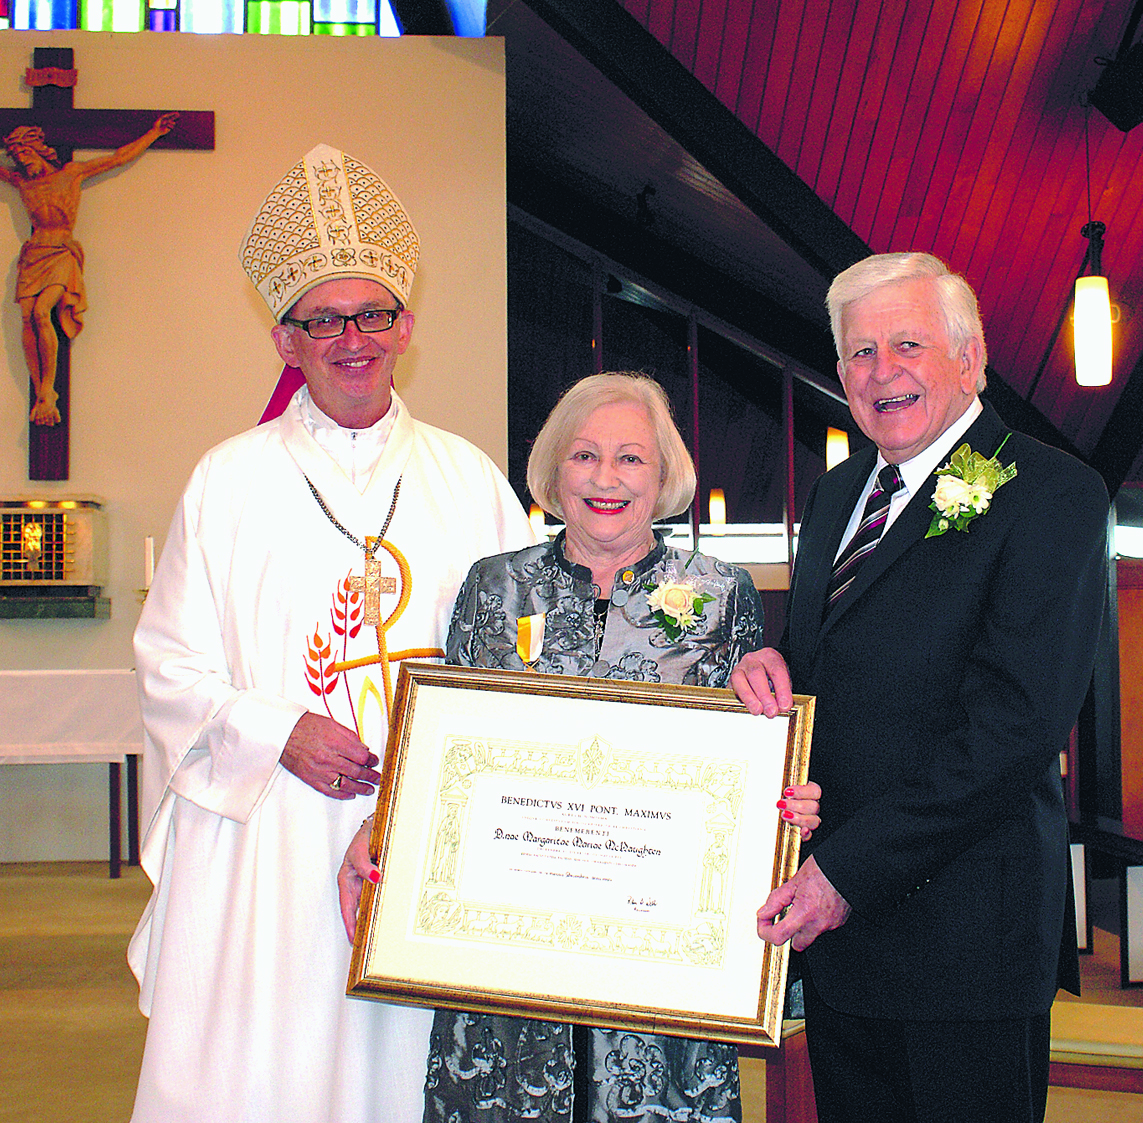 Papal award for 60 years of musical ministry